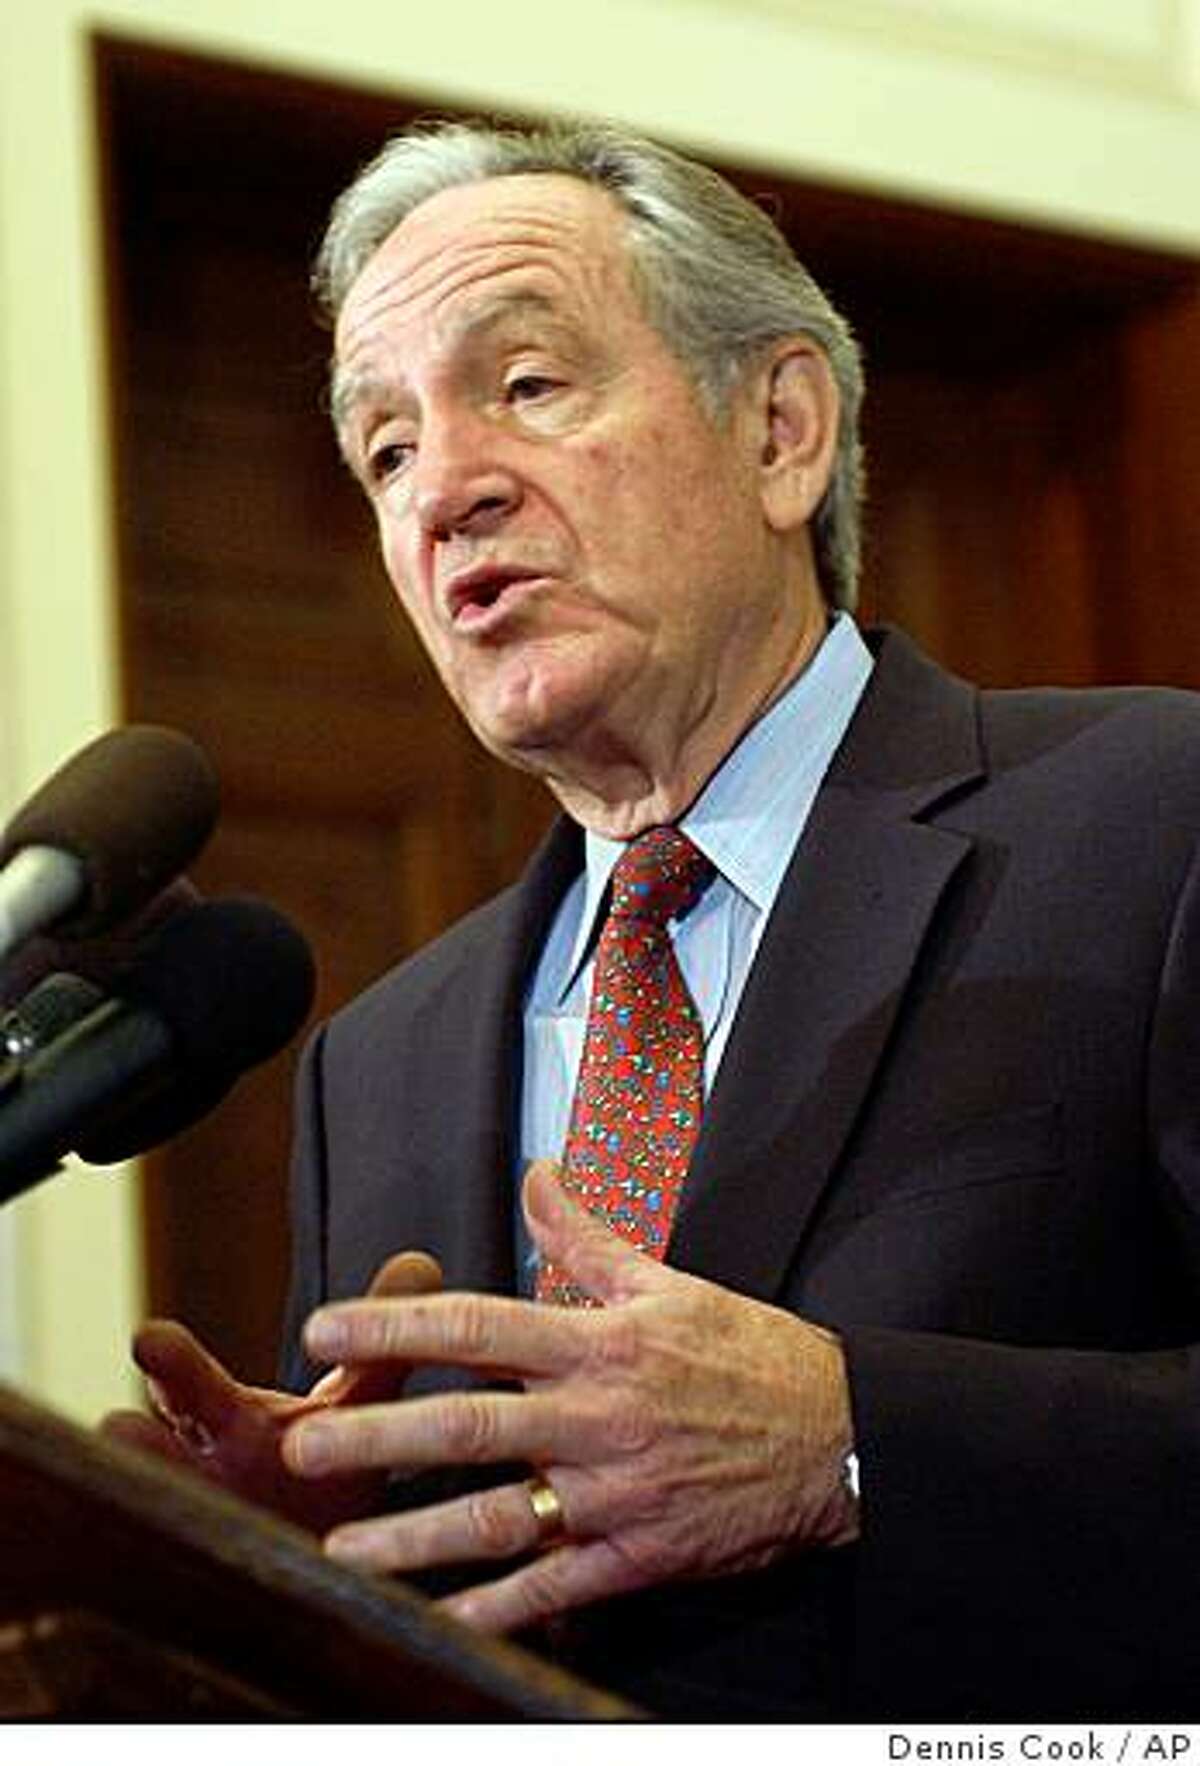 Incoming Senate Agriculture Committee Chairman, Sen. Tom Harkin, D-Iowa, gestures during a news conference on Capitol Hill in Washington, Tuesday, Dec. 12, 2006. (AP Photo/Dennis Cook)